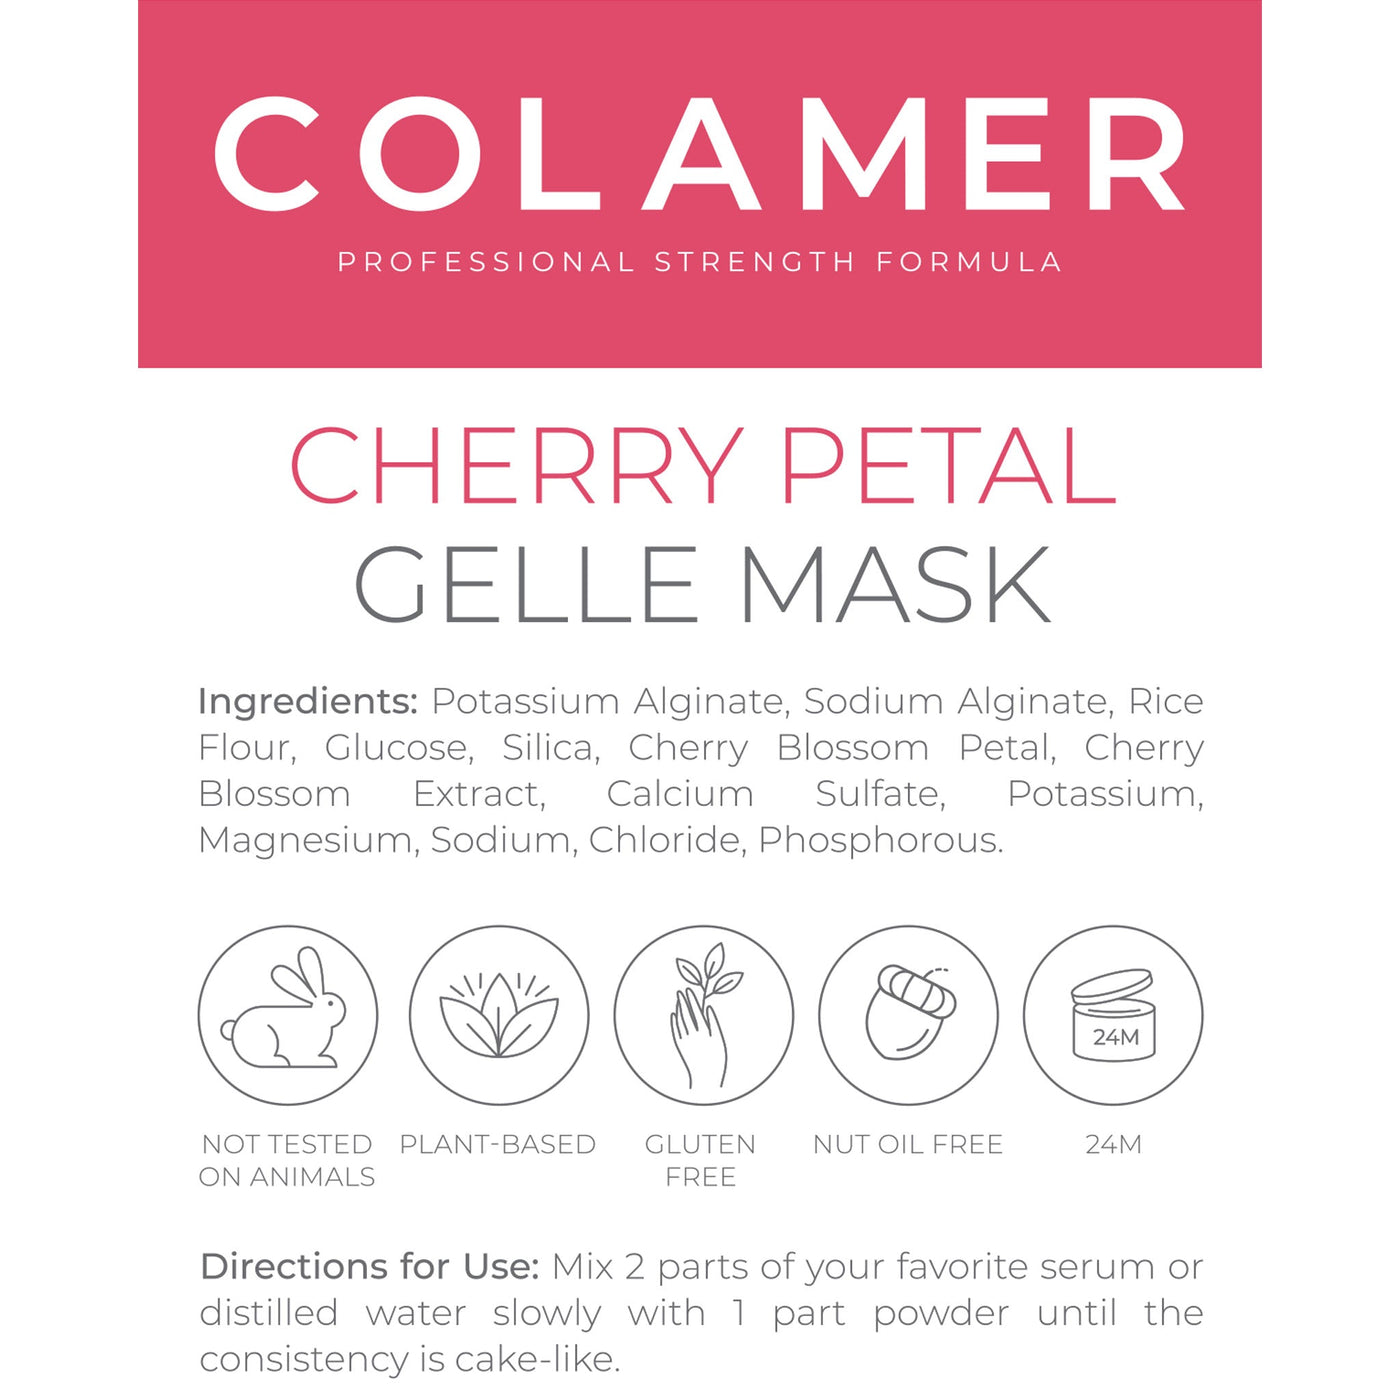 Cherry Petal Gelle Mask label with product information